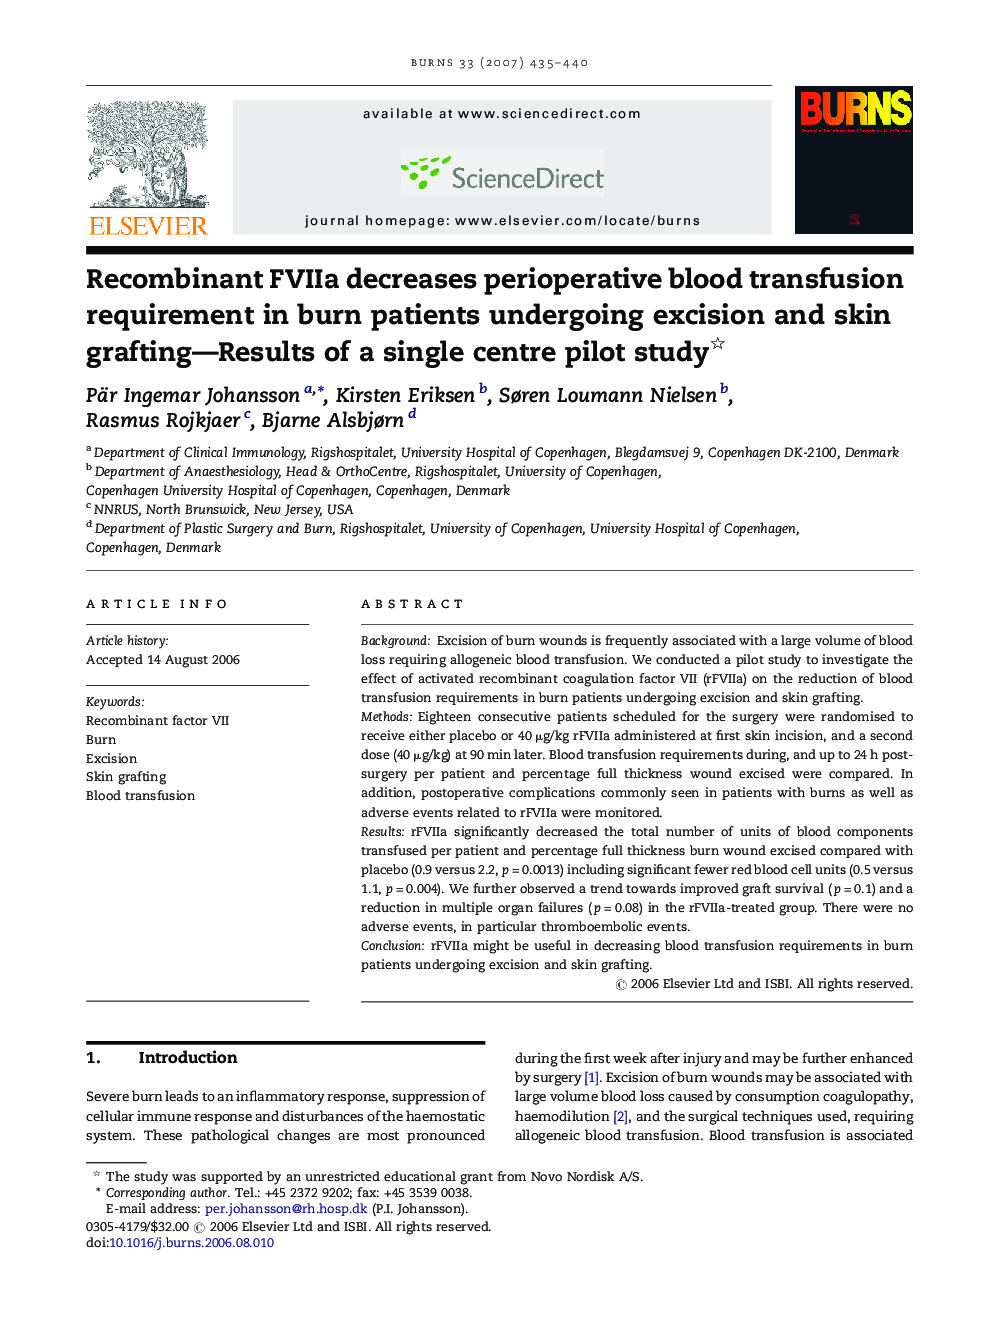 Recombinant FVIIa decreases perioperative blood transfusion requirement in burn patients undergoing excision and skin grafting—Results of a single centre pilot study 